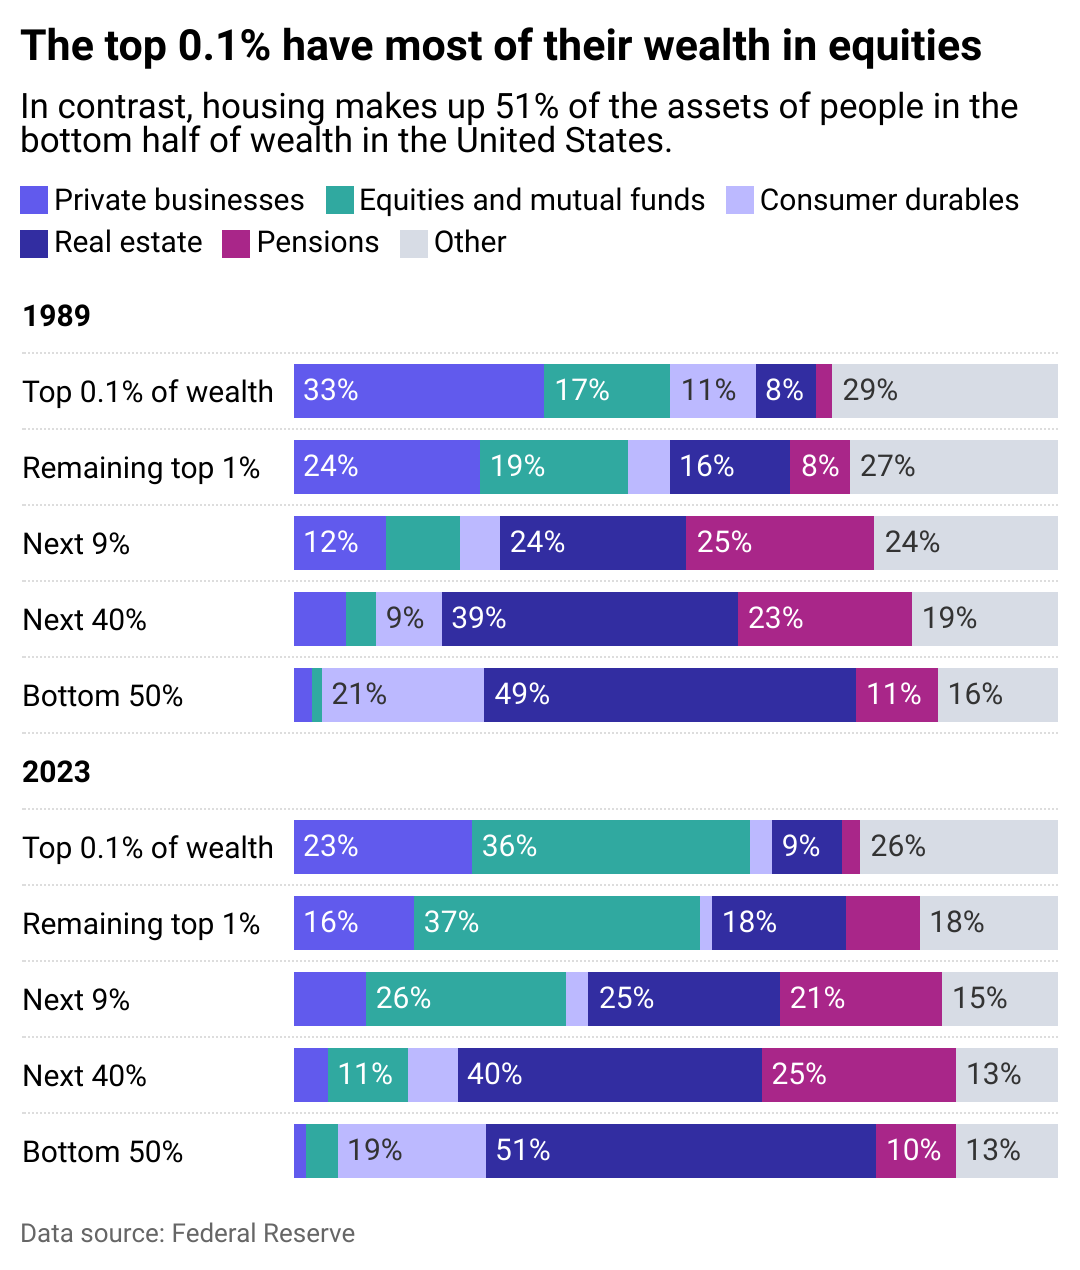 A stacked bar chart showing the top 0.1% have most of their wealth in equities where housing makes up for 51% of the assets of people in the bottom half of wealth in the United States. 